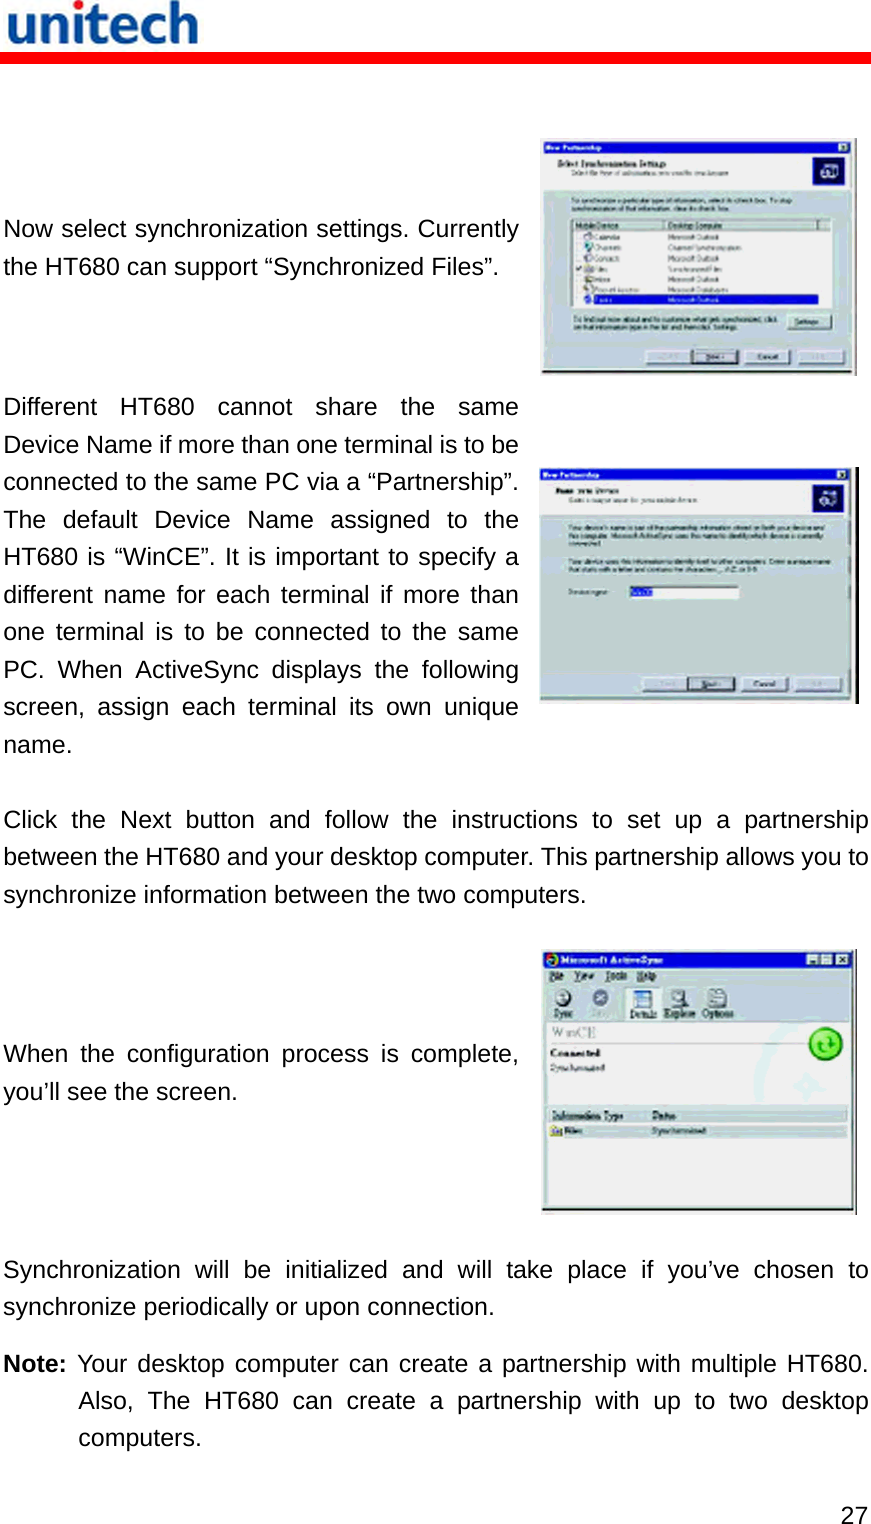   27  Now select synchronization settings. Currently the HT680 can support “Synchronized Files”. Different HT680 cannot share the same Device Name if more than one terminal is to be connected to the same PC via a “Partnership”. The default Device Name assigned to the HT680 is “WinCE”. It is important to specify a different name for each terminal if more than one terminal is to be connected to the same PC. When ActiveSync displays the following screen, assign each terminal its own unique name. Click the Next button and follow the instructions to set up a partnership between the HT680 and your desktop computer. This partnership allows you to synchronize information between the two computers. When the configuration process is complete, you’ll see the screen.  Synchronization will be initialized and will take place if you’ve chosen to synchronize periodically or upon connection. Note: Your desktop computer can create a partnership with multiple HT680. Also, The HT680 can create a partnership with up to two desktop computers. 